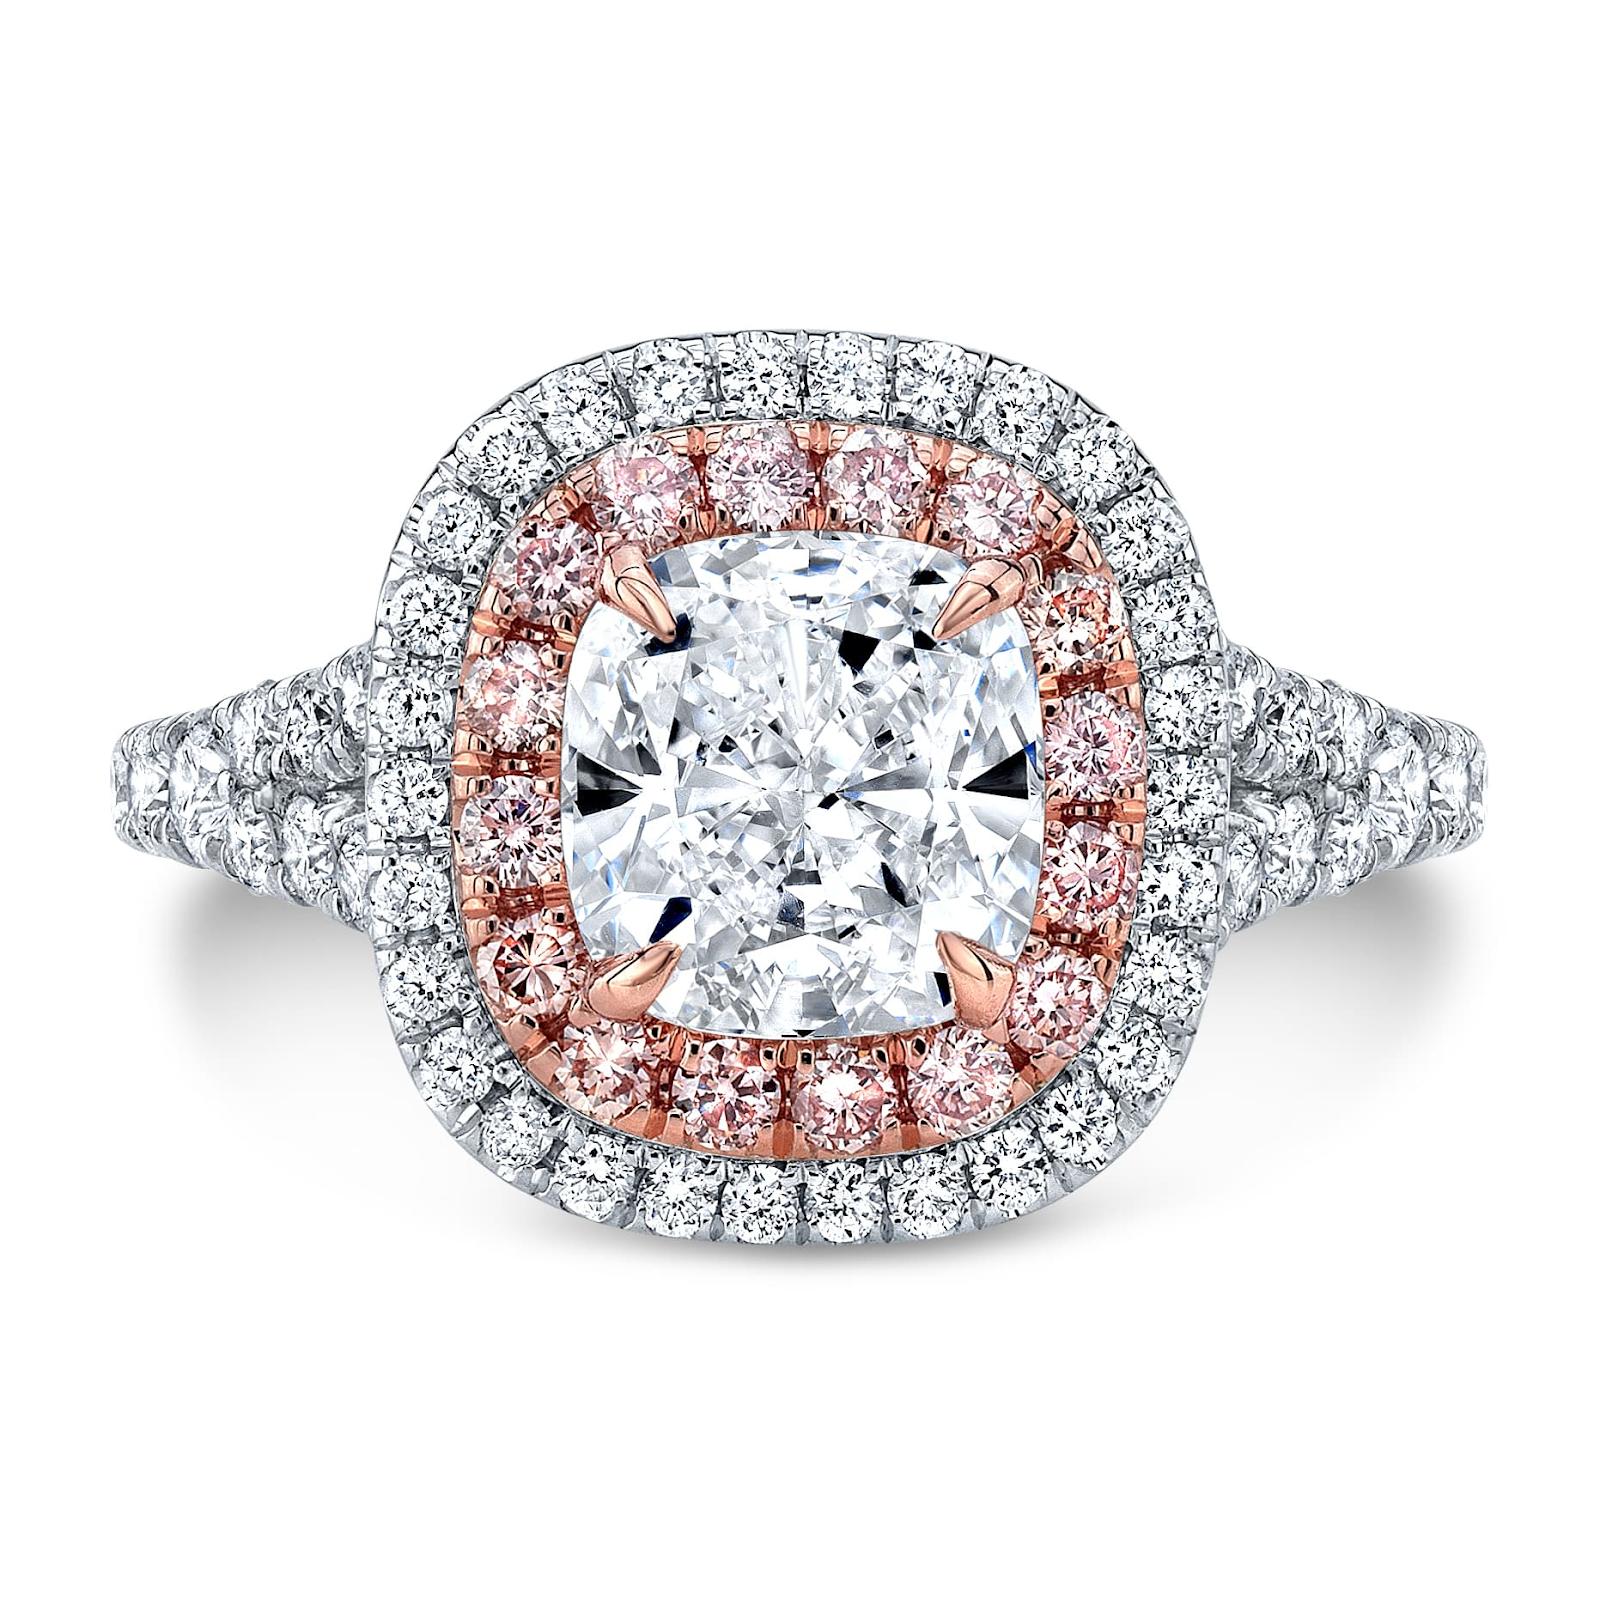 The Top 10 Most Expensive Diamond Rings Ever Made – All Diamond